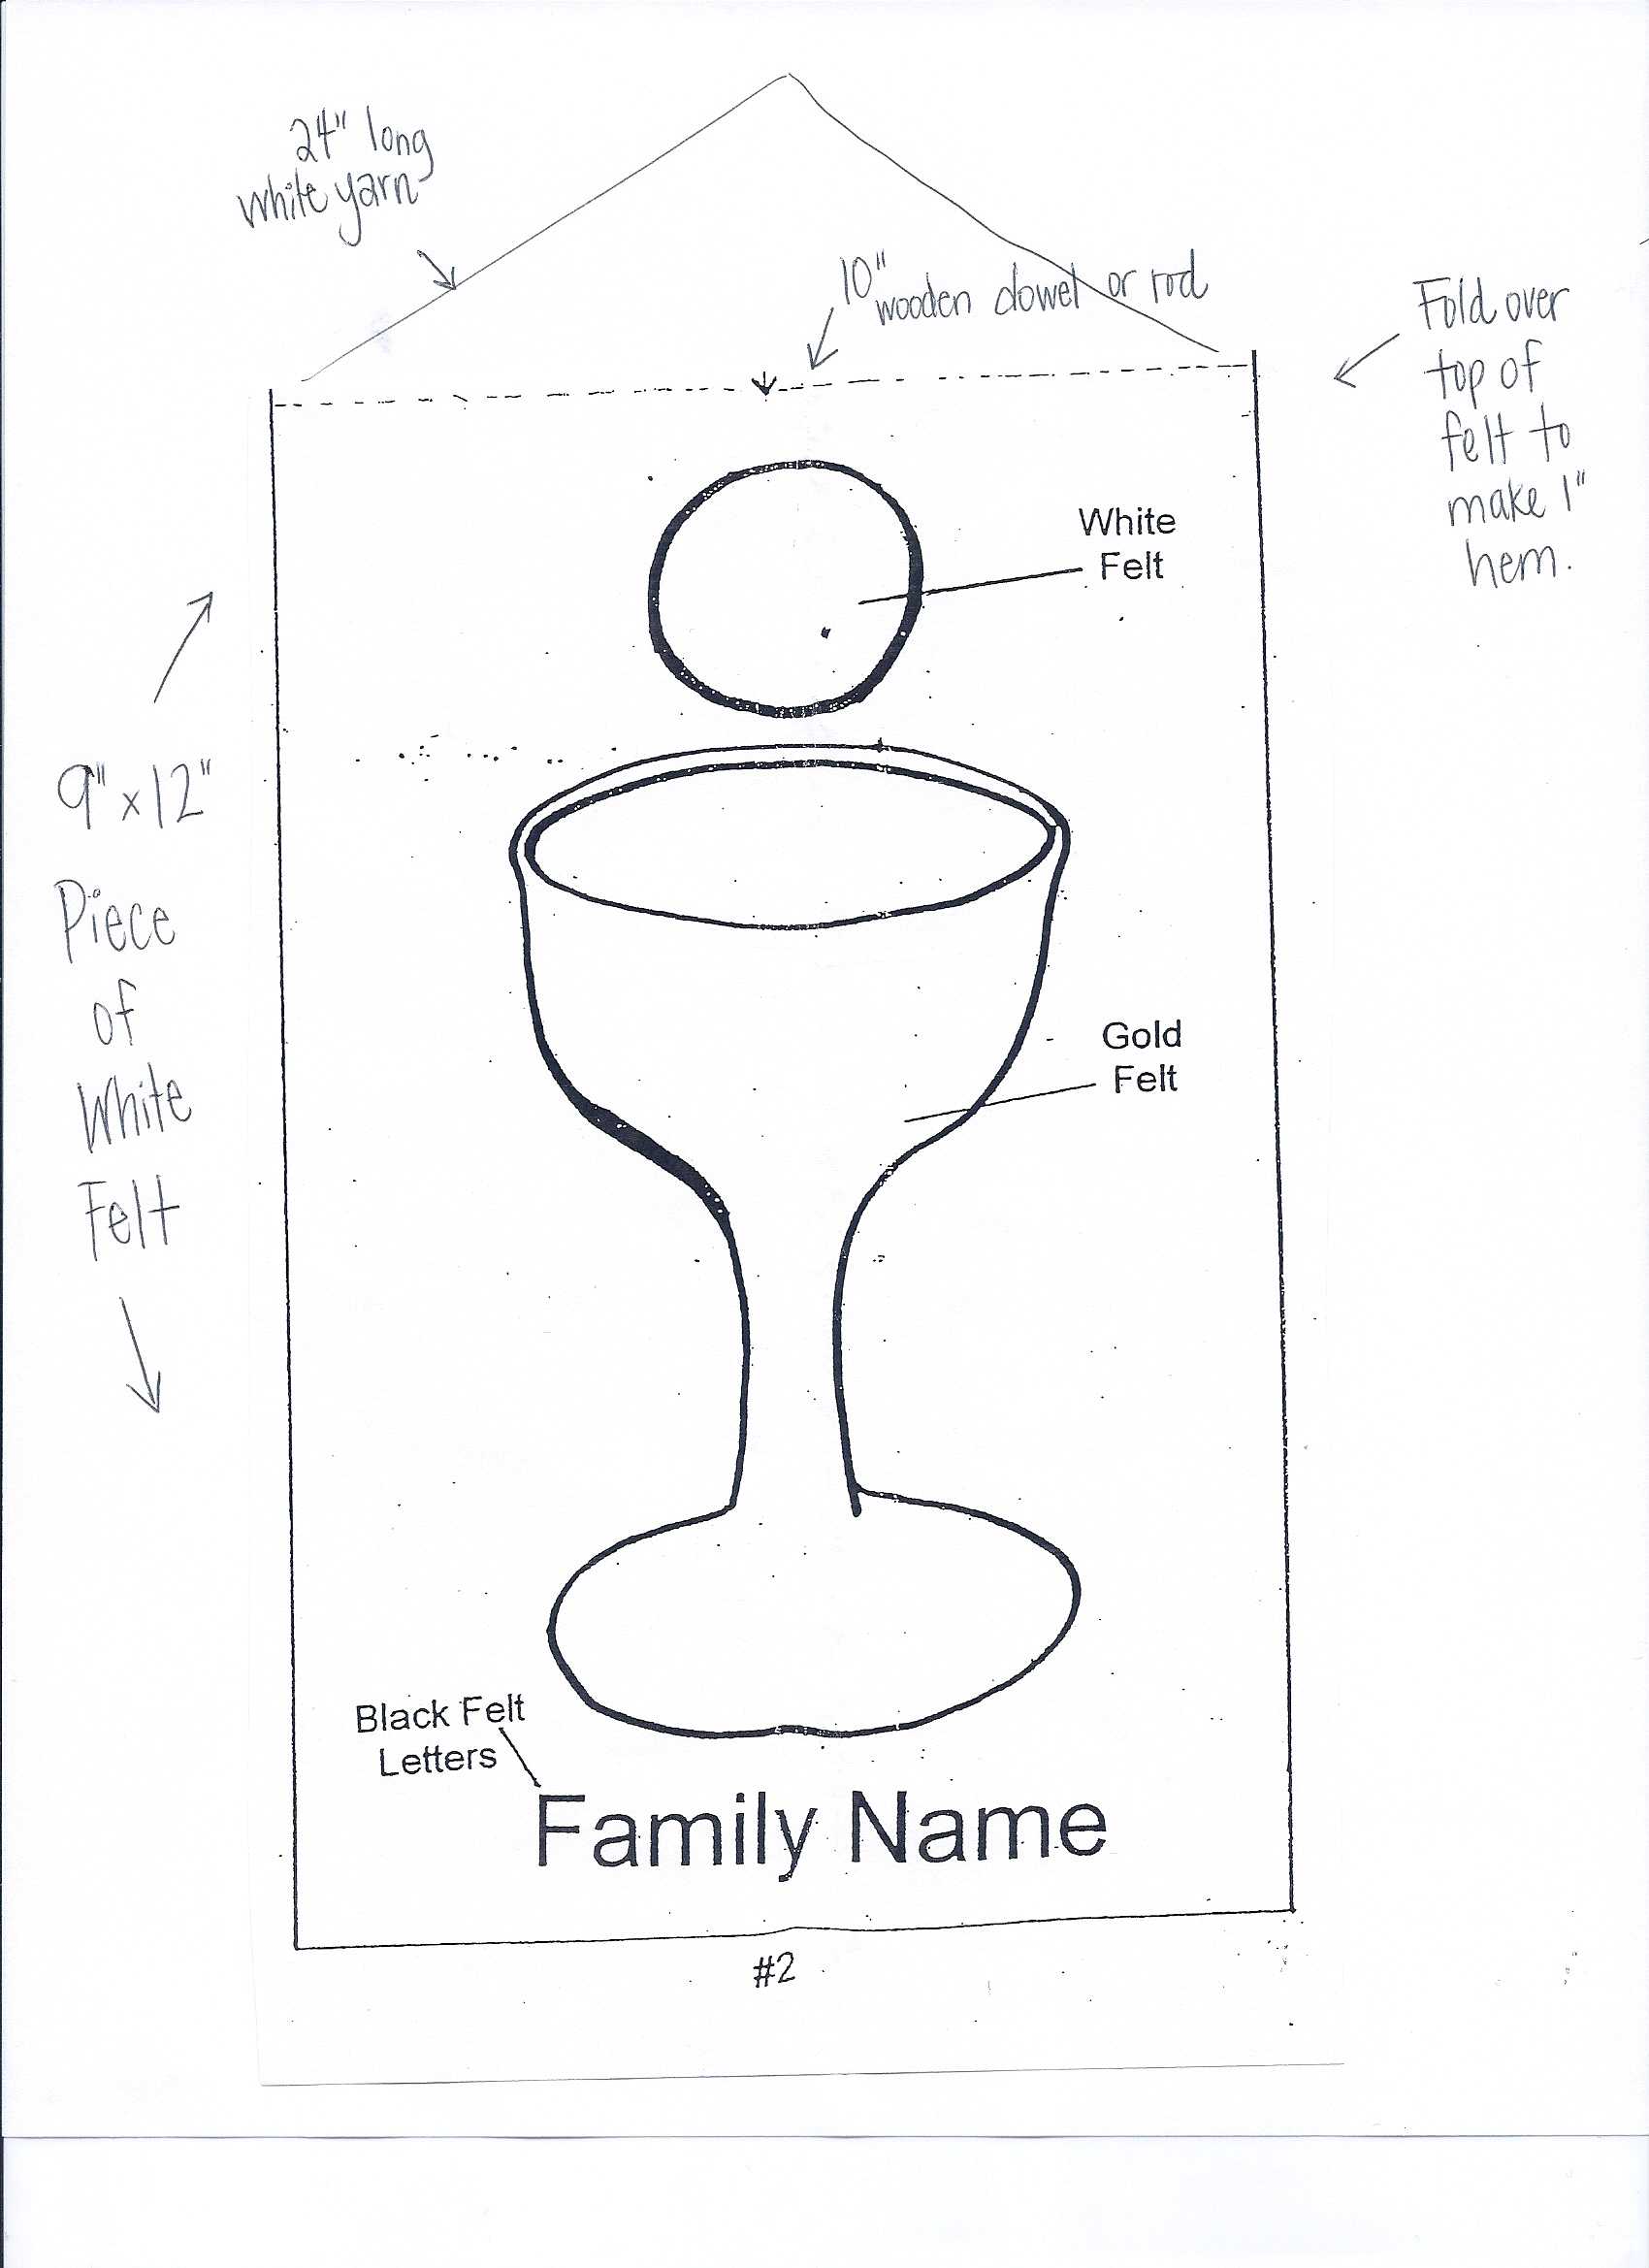 First Communion Banner Templates Bing Images. 1000 Images Pertaining To First Communion Banner Templates